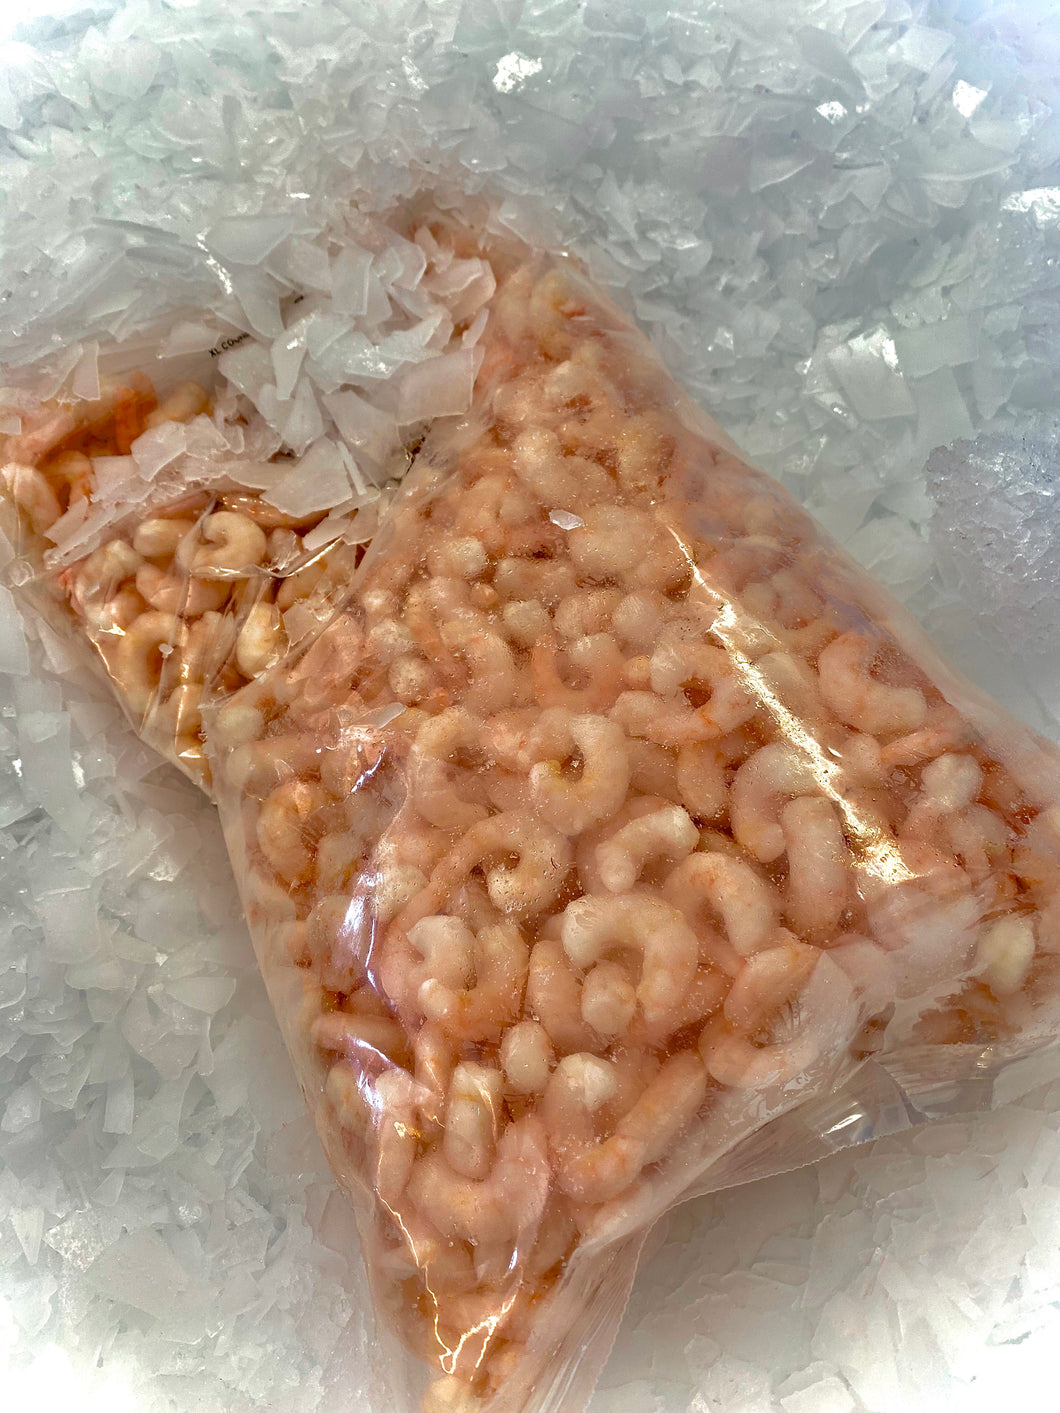 Cocktail prawns by Marisco Fish! Cornwall's finest seafood. Packed in a plastic bag on top of fresh ice.